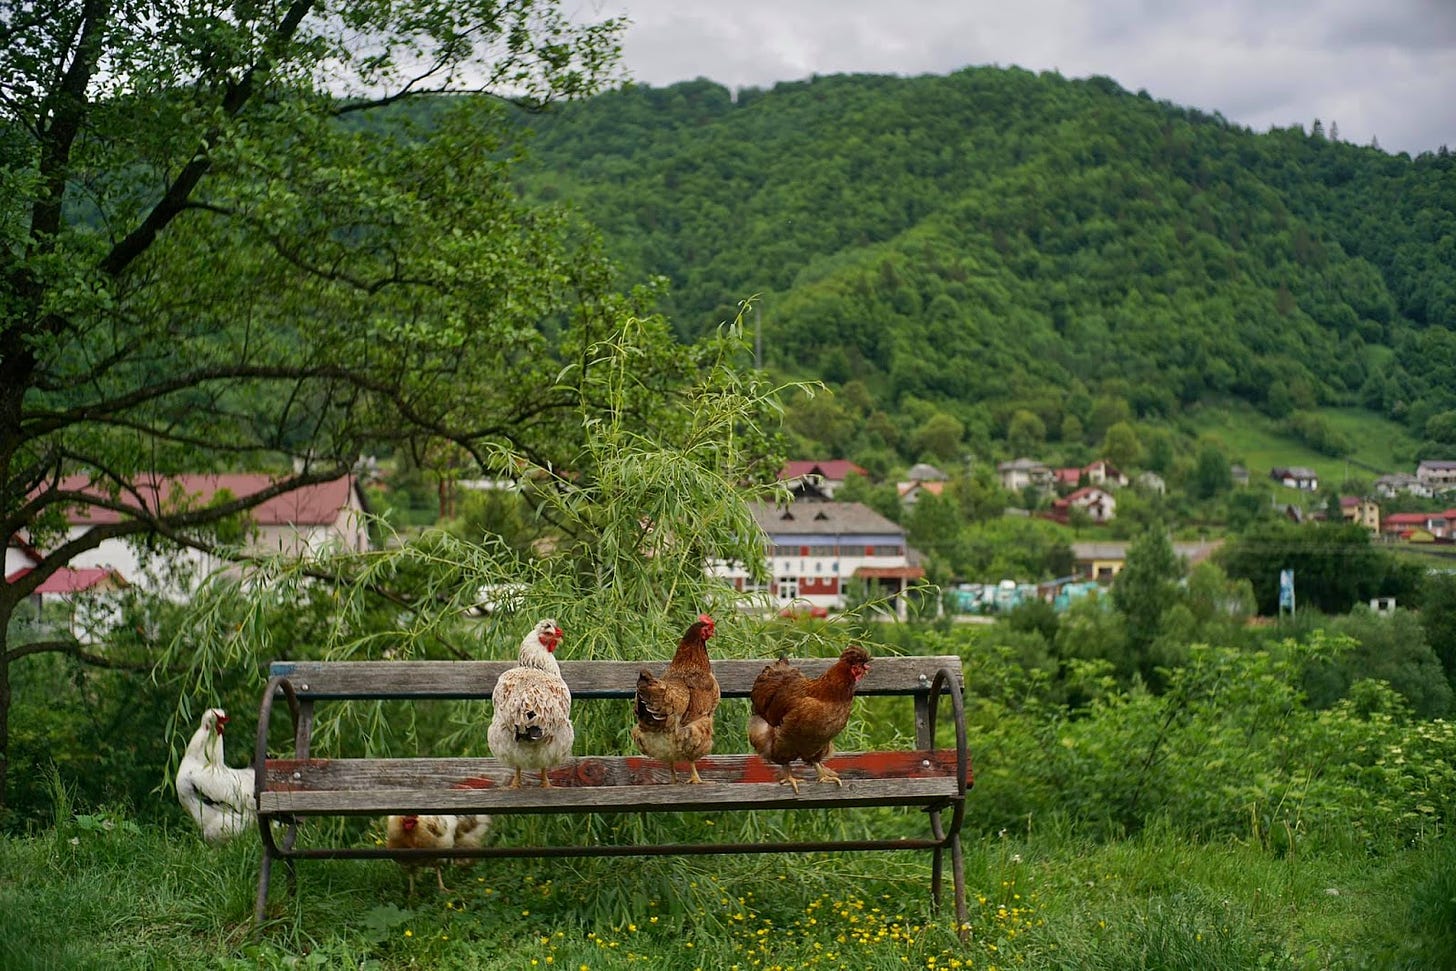 A group of chickens on a bench

Description automatically generated